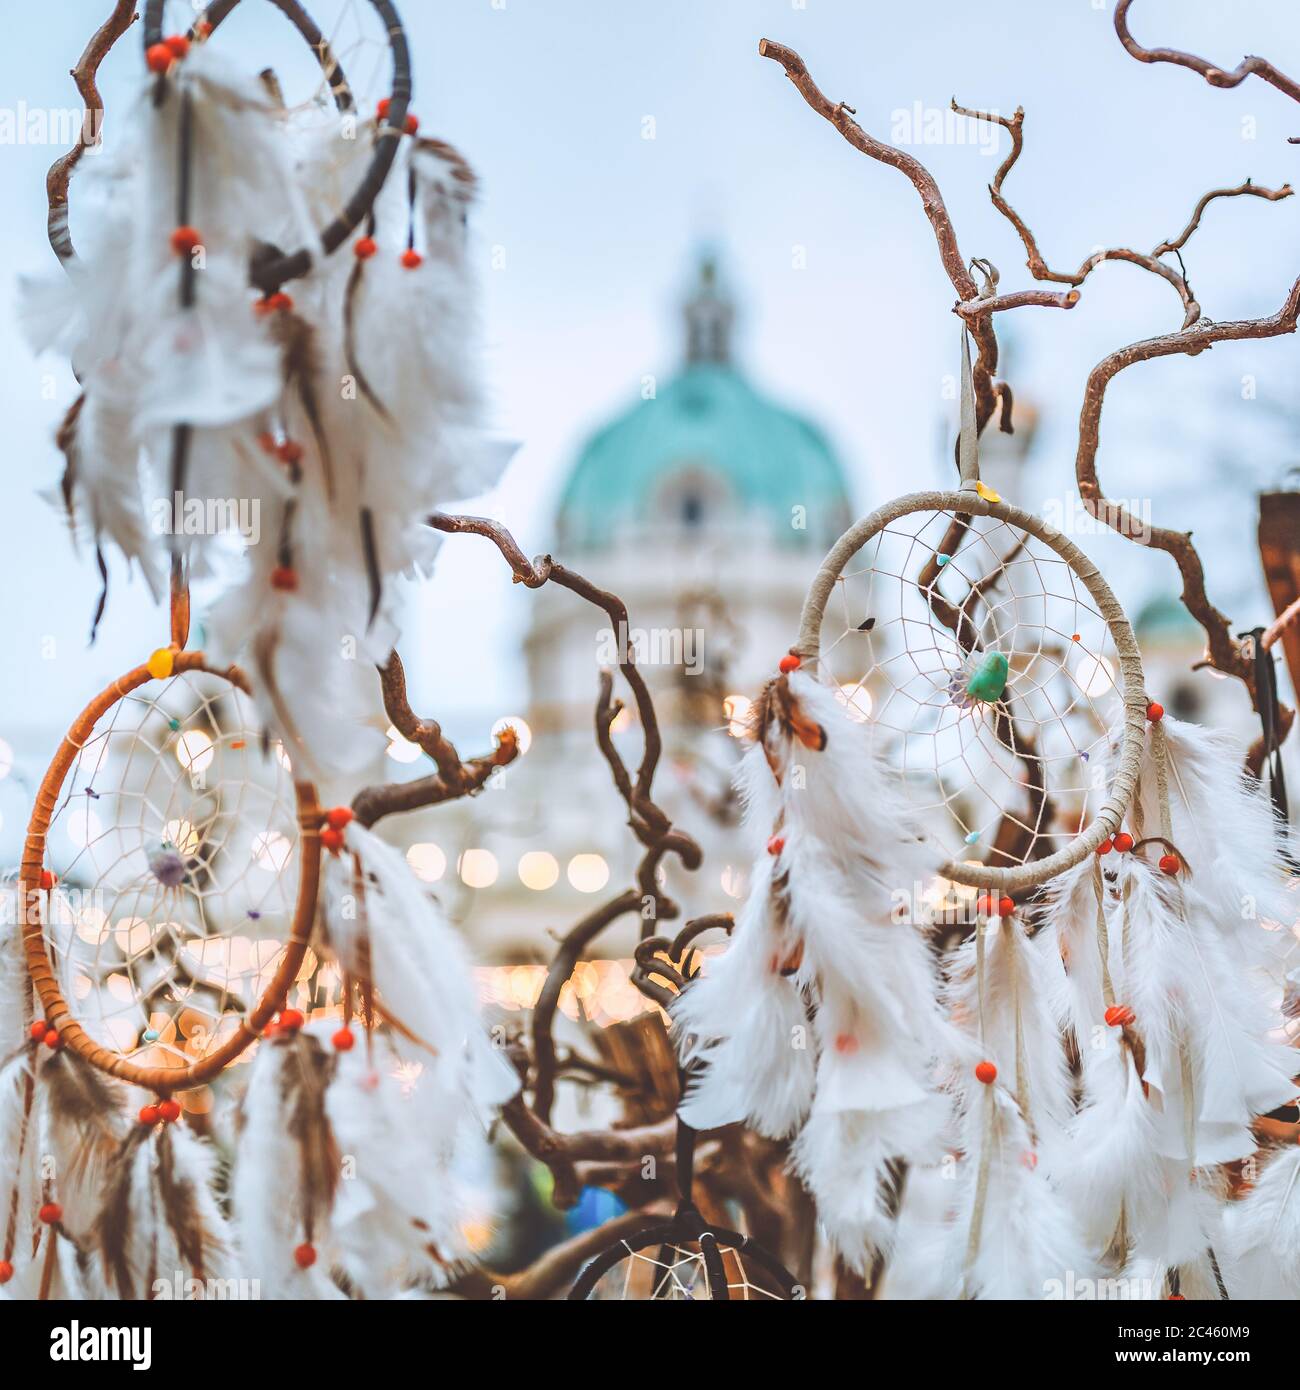 Set of dream catchers and St. Charles Church in Vienna with Christmas lights in the background Stock Photo